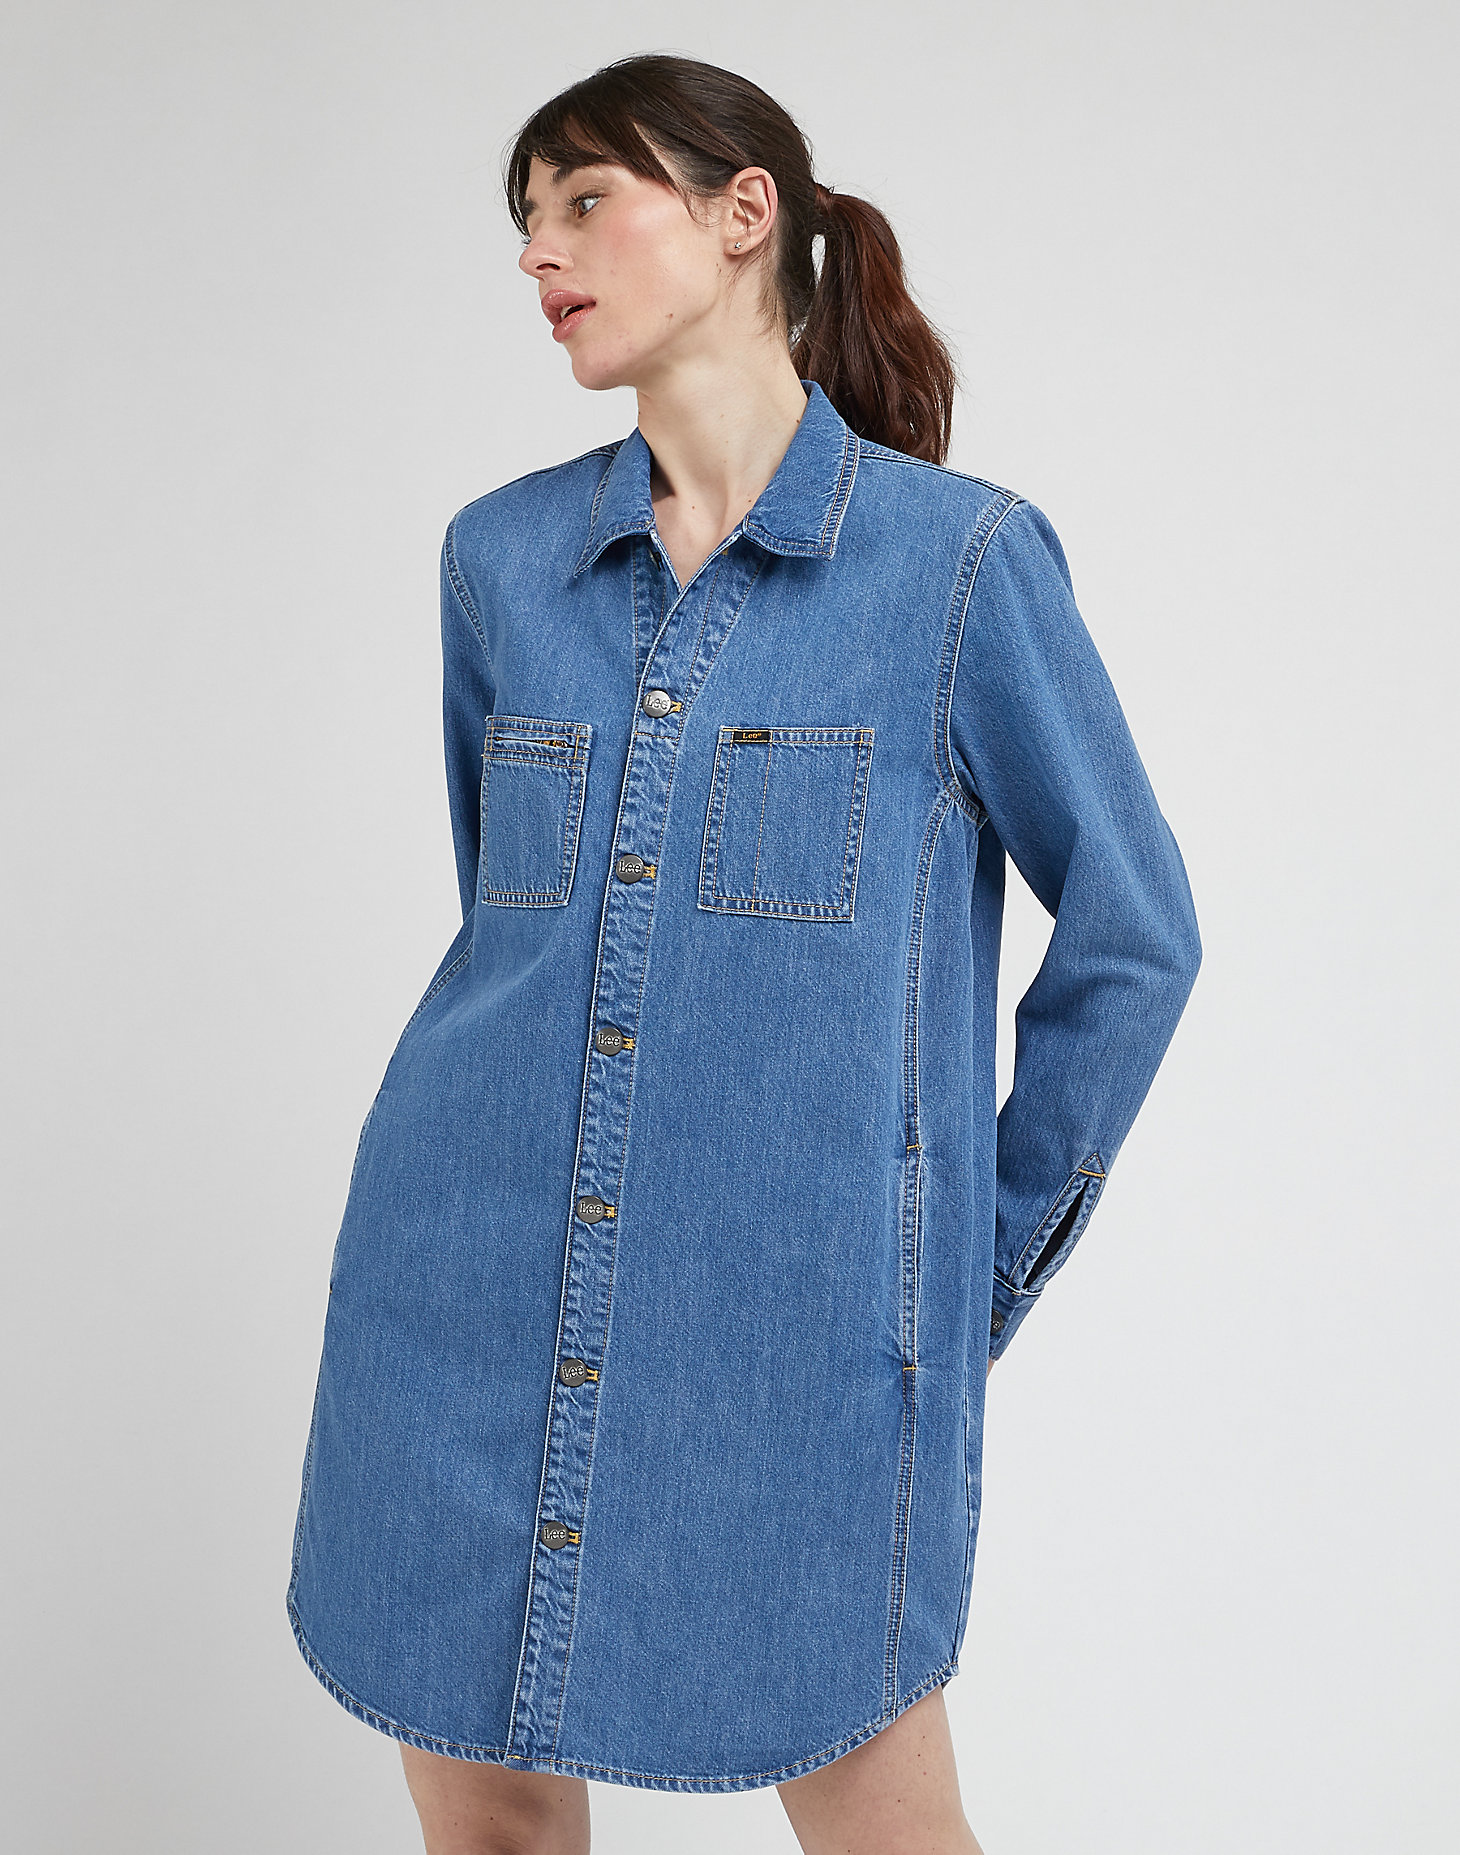 Unionall Shirt Dress in The Moment main view